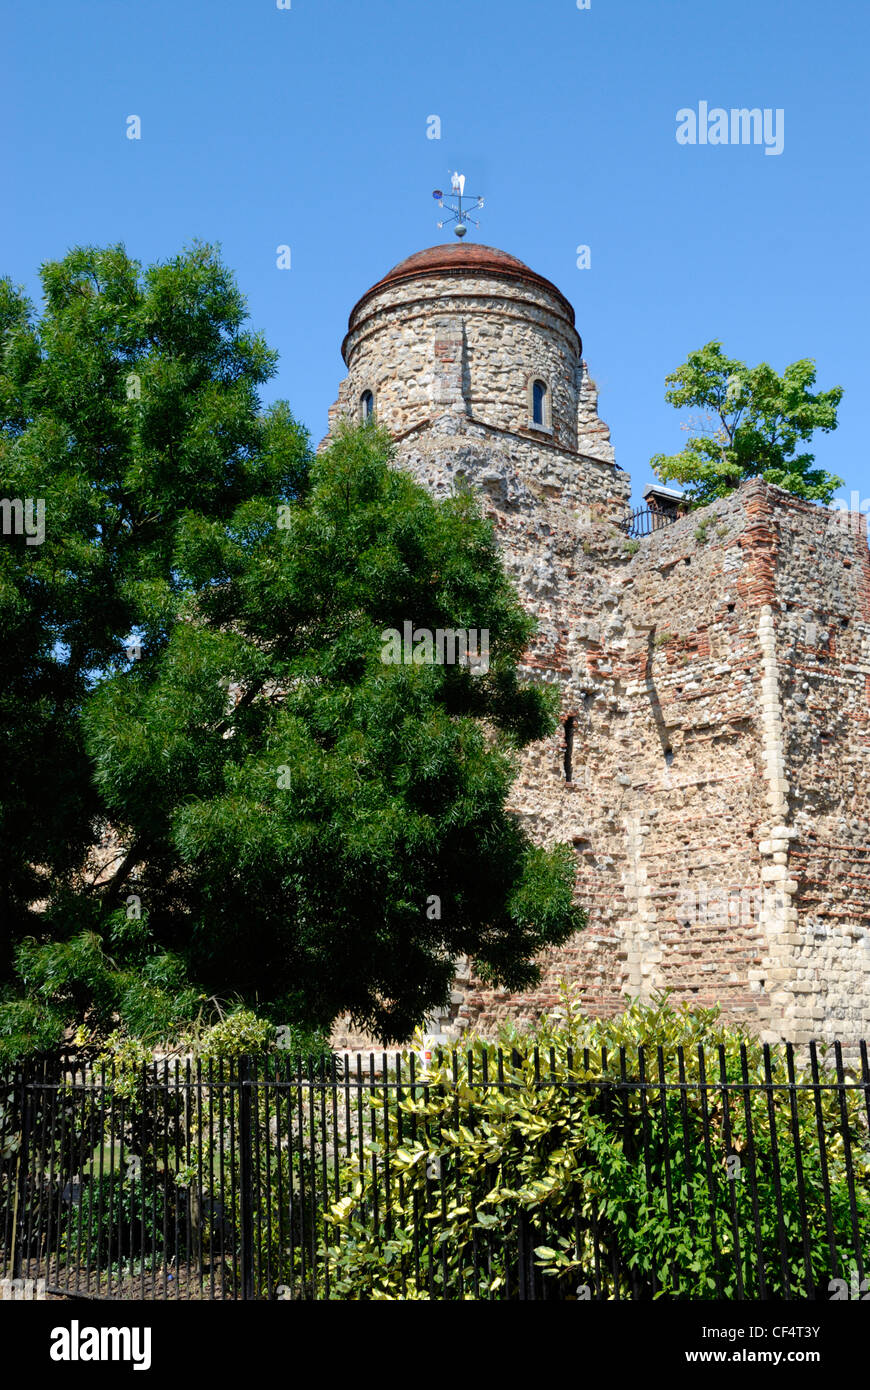 Colchester Castle is now a public museum showing Colchester's history from the Stone Age to the Civil War. It is an almost compl Stock Photo